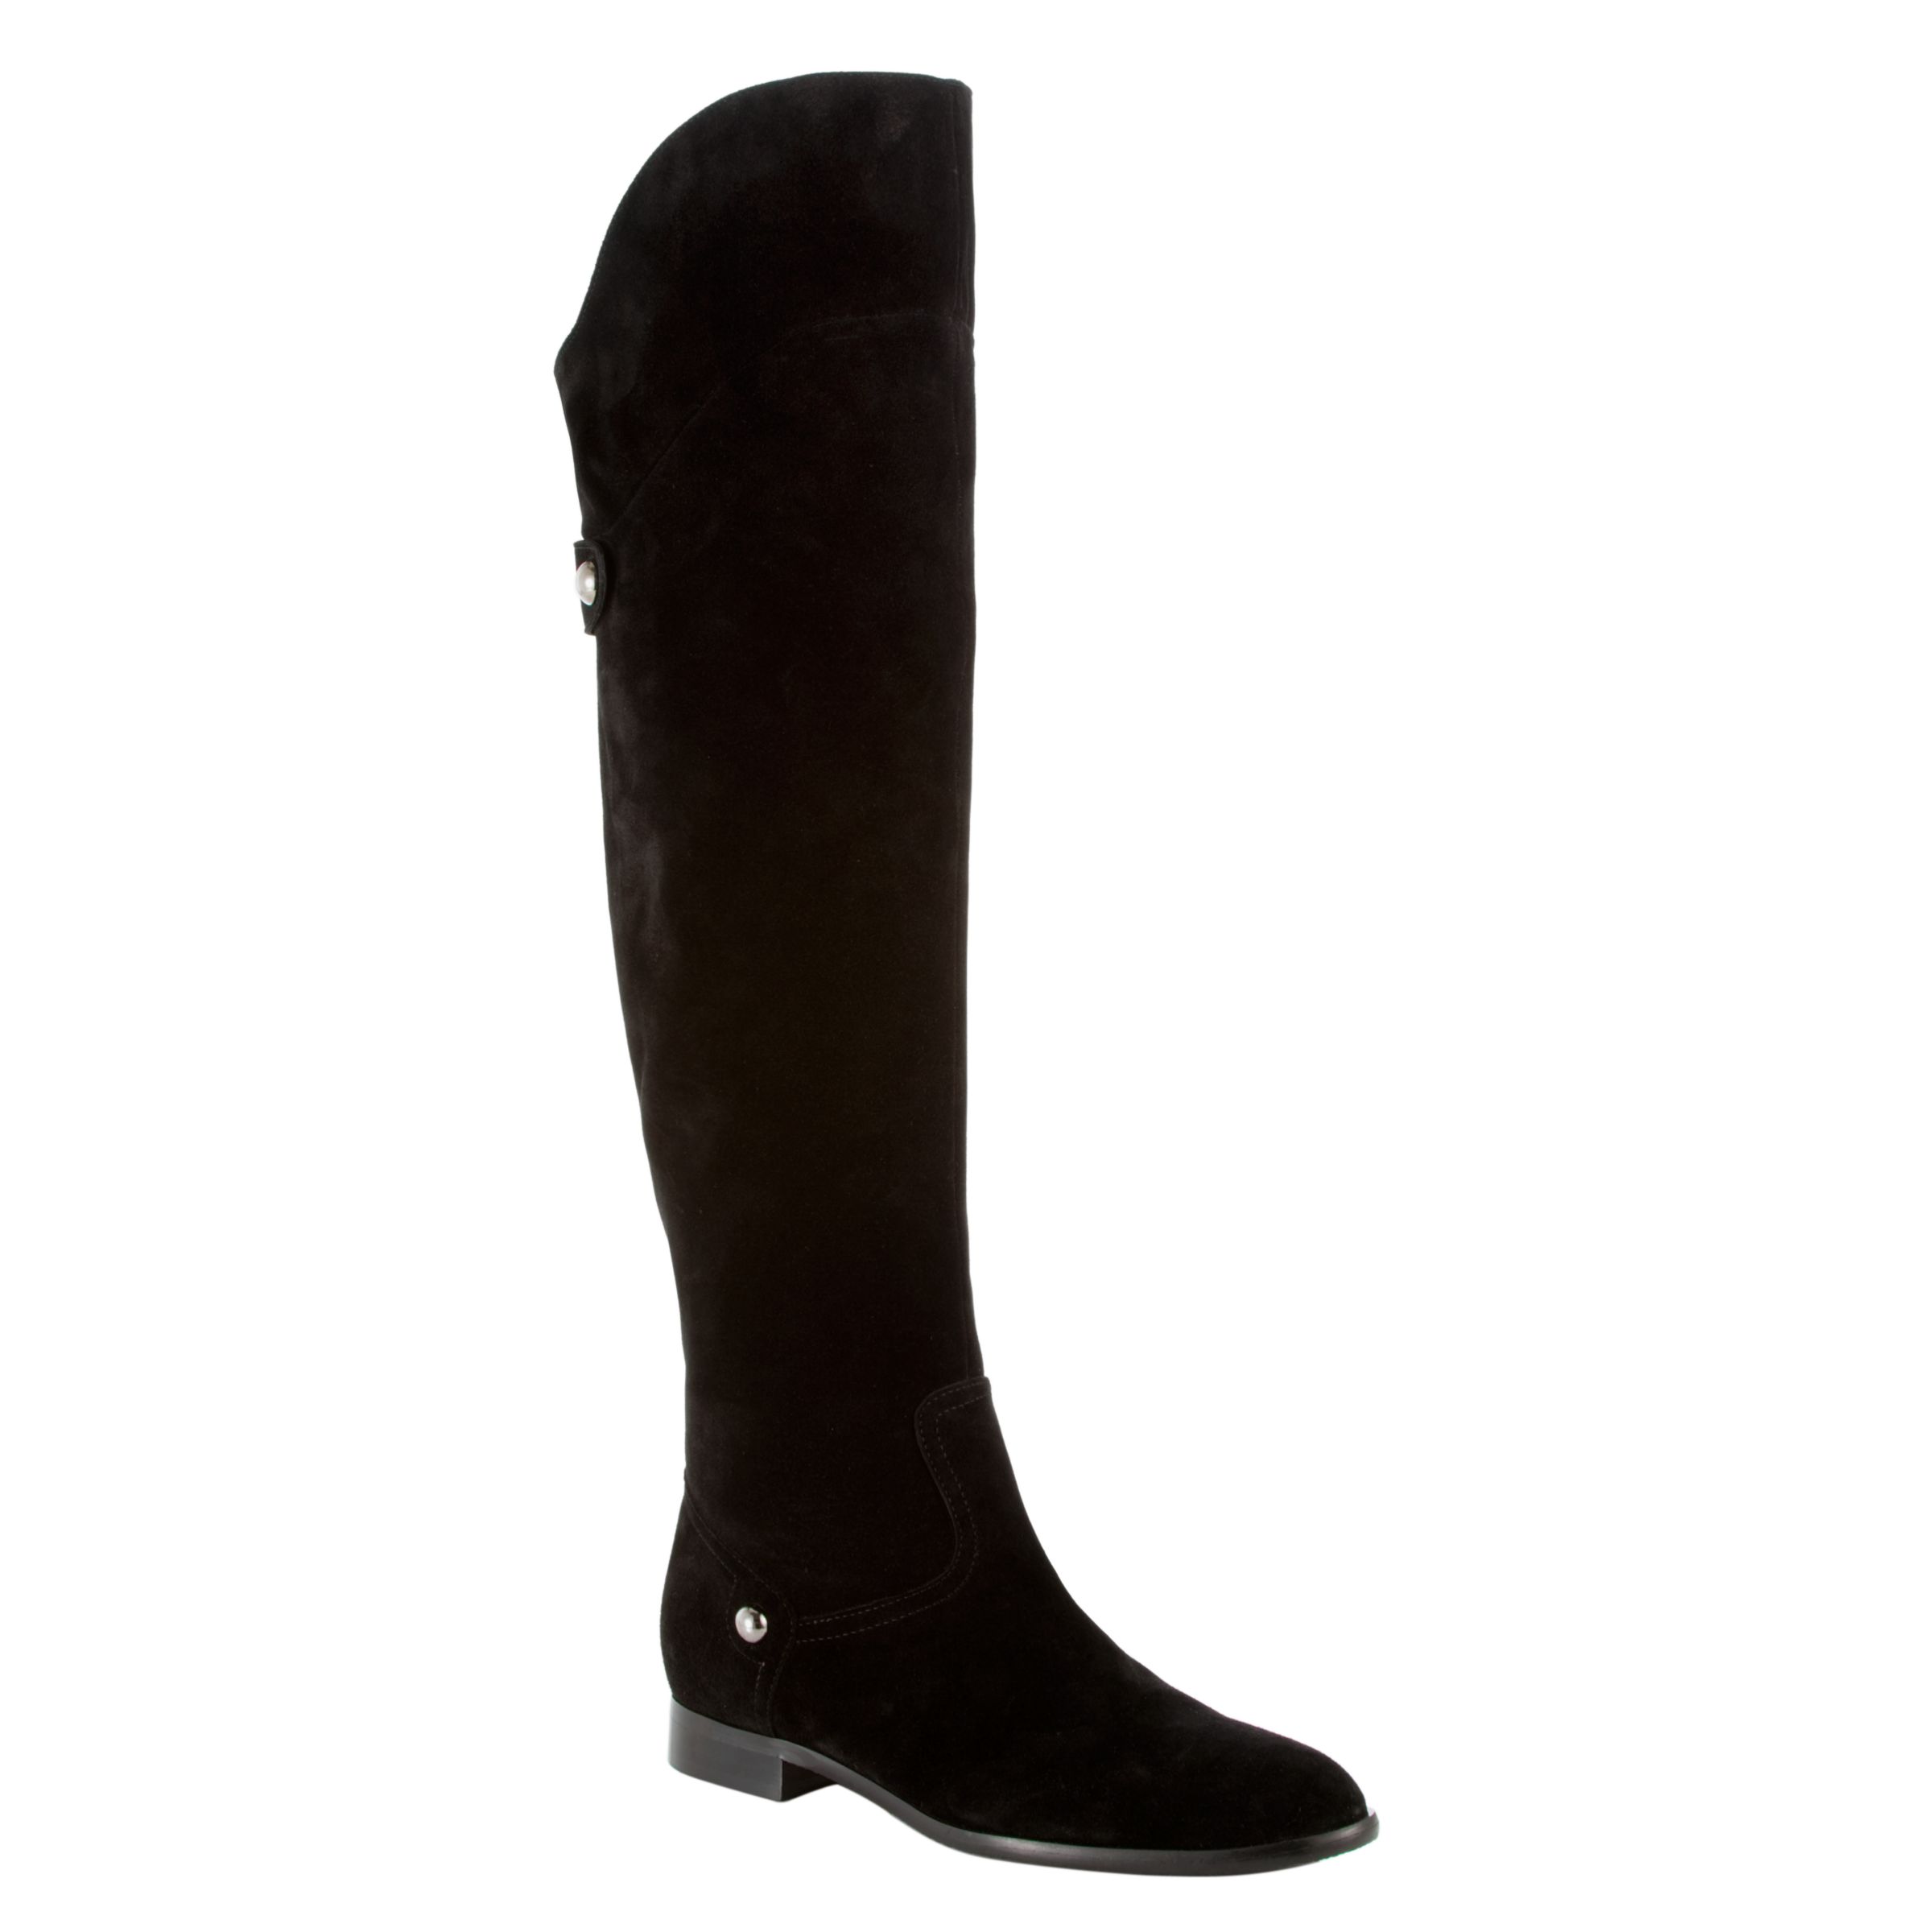 COLLECTION, John Lewis Women Romeo Ruched Long Boots, Black Suede at John Lewis